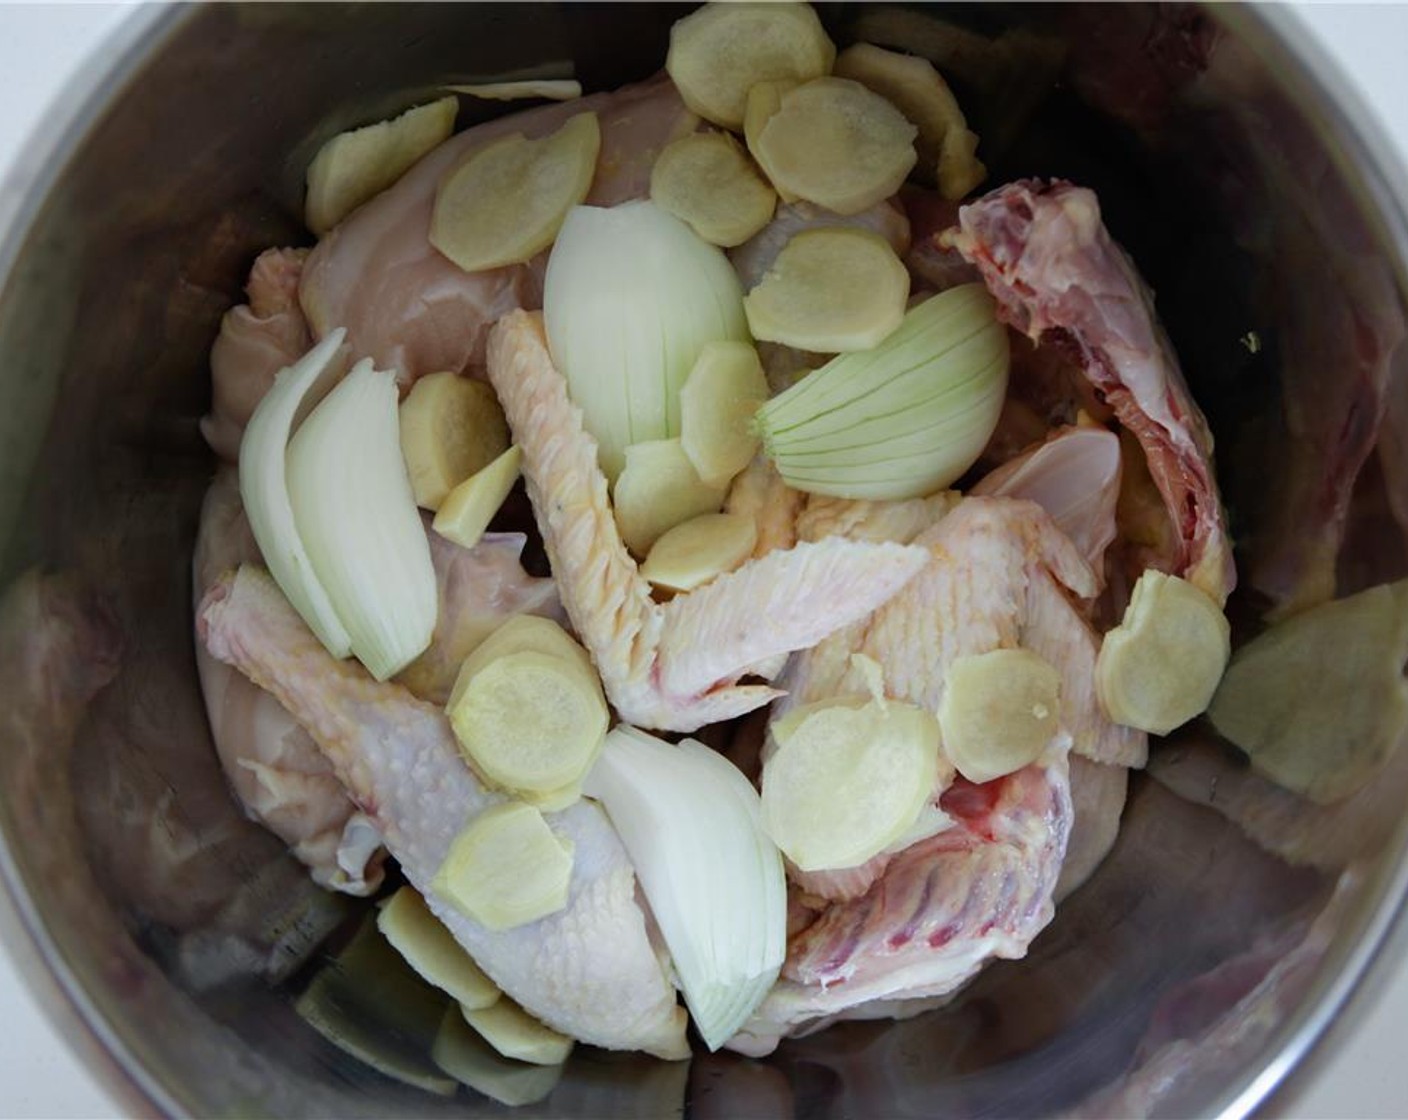 step 2 Peel and slice the Fresh Ginger (2 in) and add to pot. Add the Sea Salt (1/2 Tbsp) and filtered Water (8 1/3 cups), ensure it just covers the chicken. If the chicken is whole, you may need to add more water. Bring to a boil uncovered, then reduce to simmer for 20 minutes.